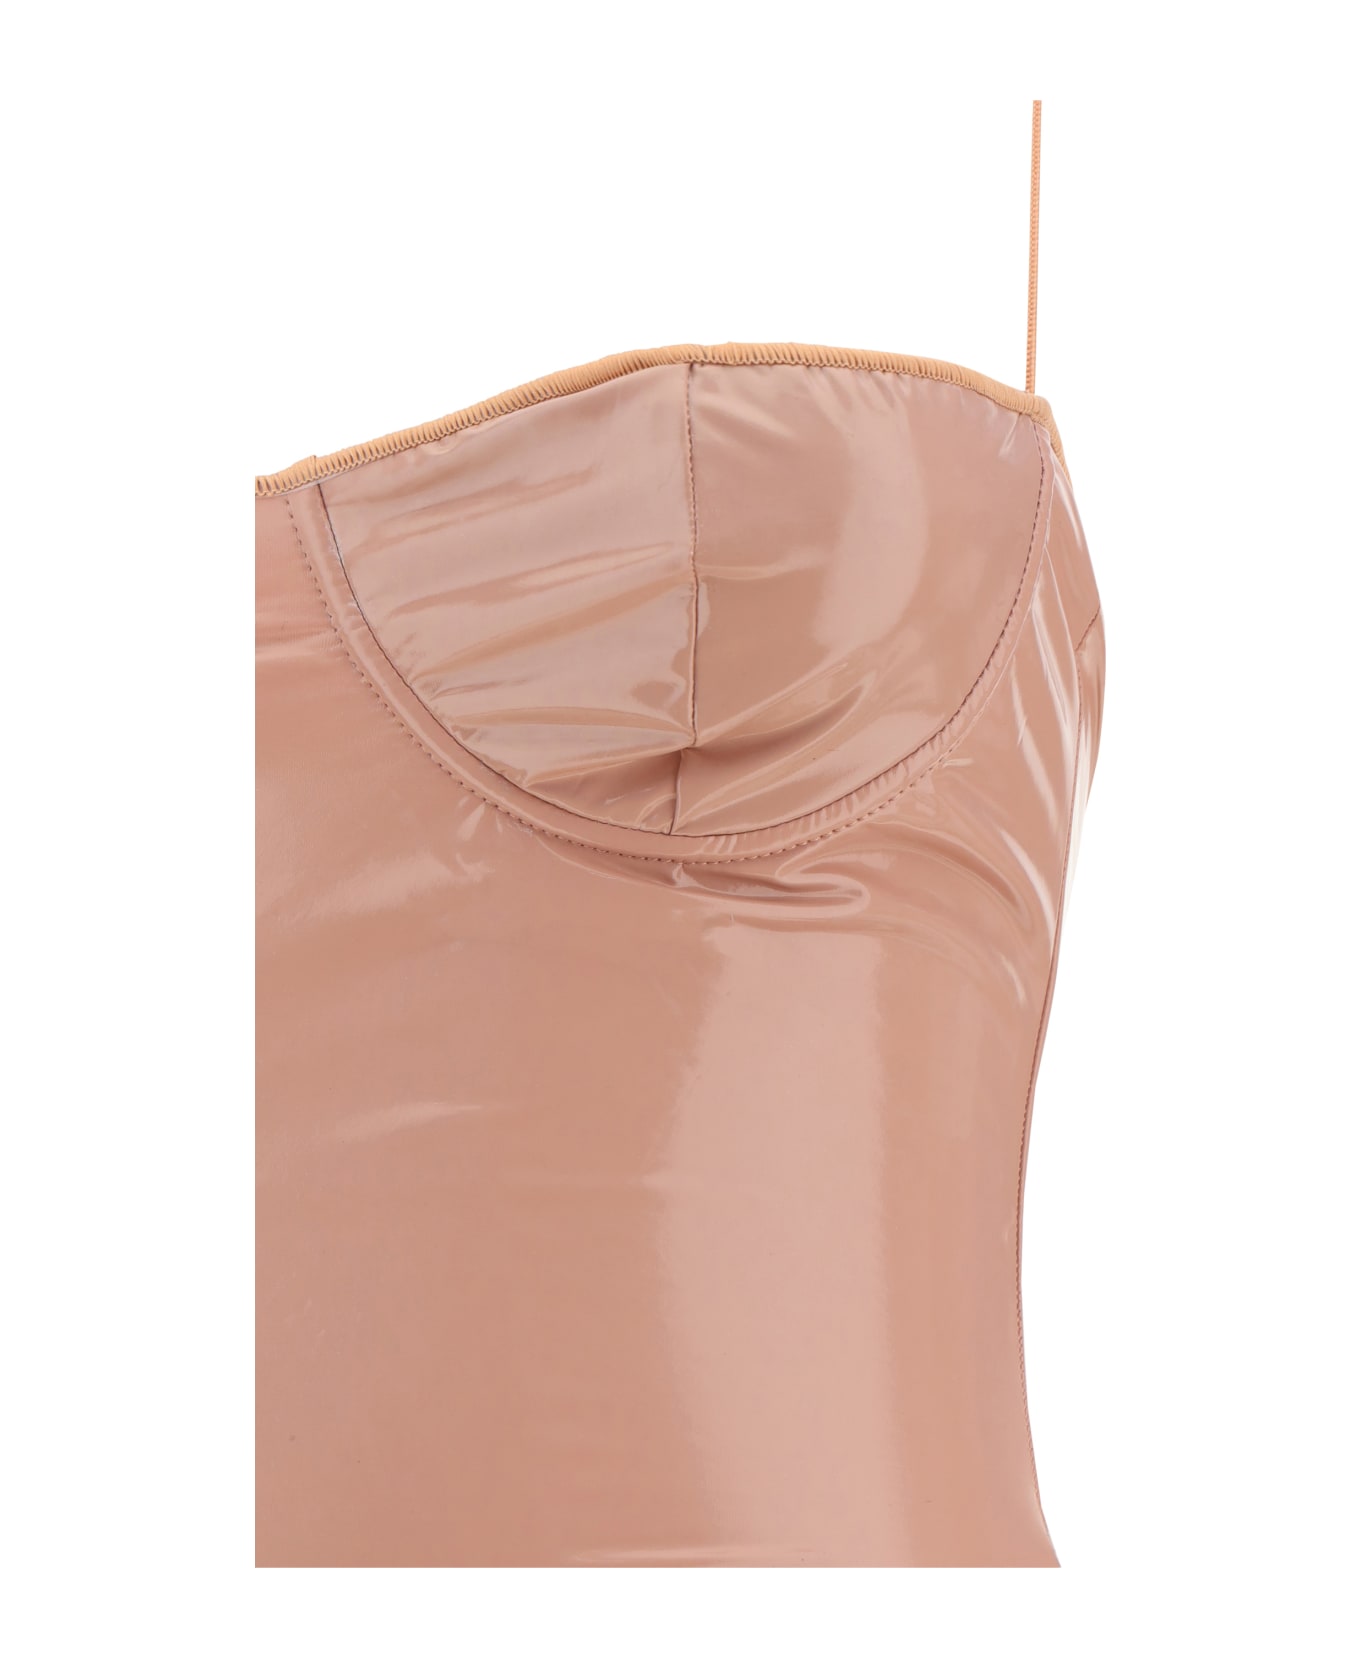 Oseree Latex Balconette Maillot Swimsuit - Rose Tan